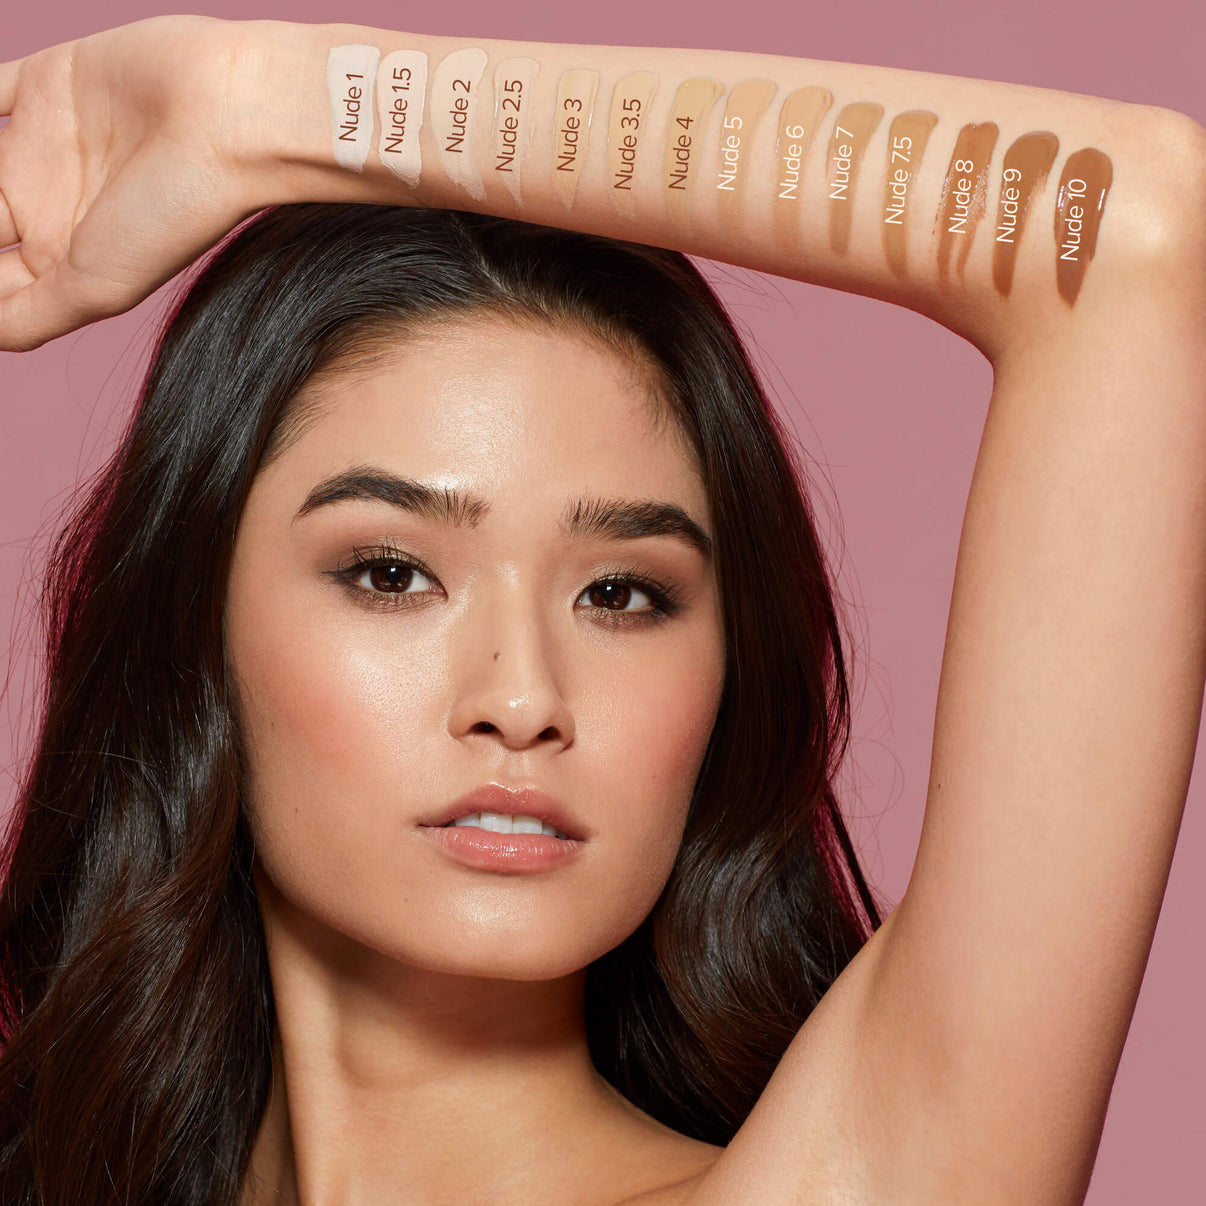 Young woman with swatches on her arm of Tinted Cover in shade nude 4 and other shades